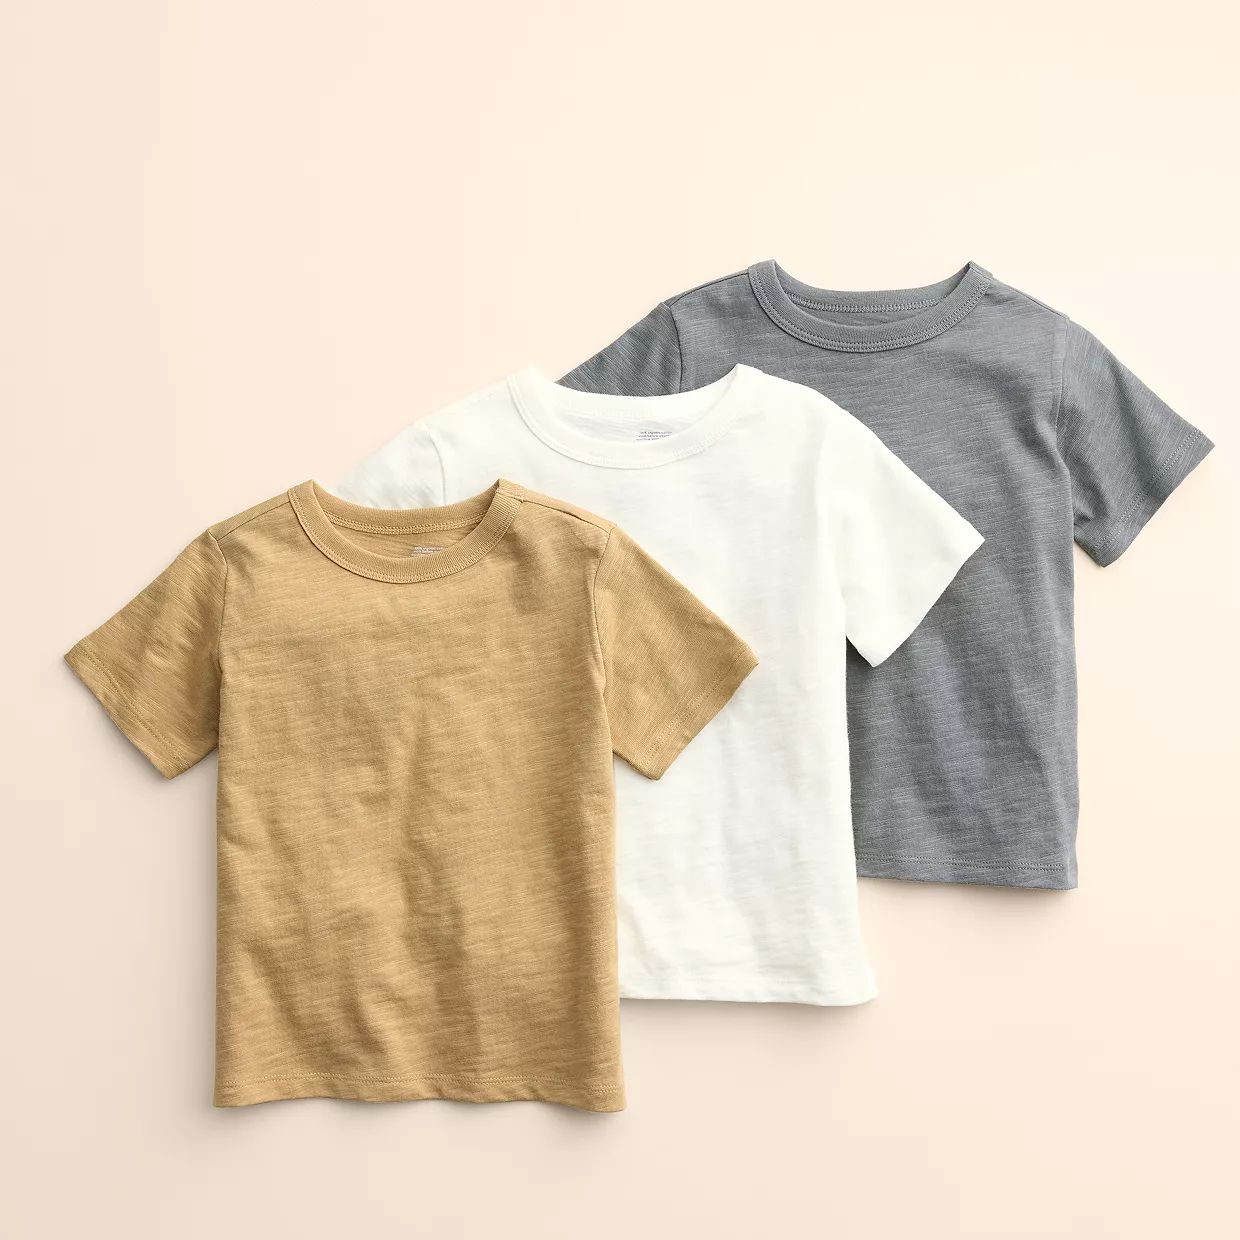 Baby & Toddler Little Co. by Lauren Conrad 3-Pack Organic Tees | Kohl's